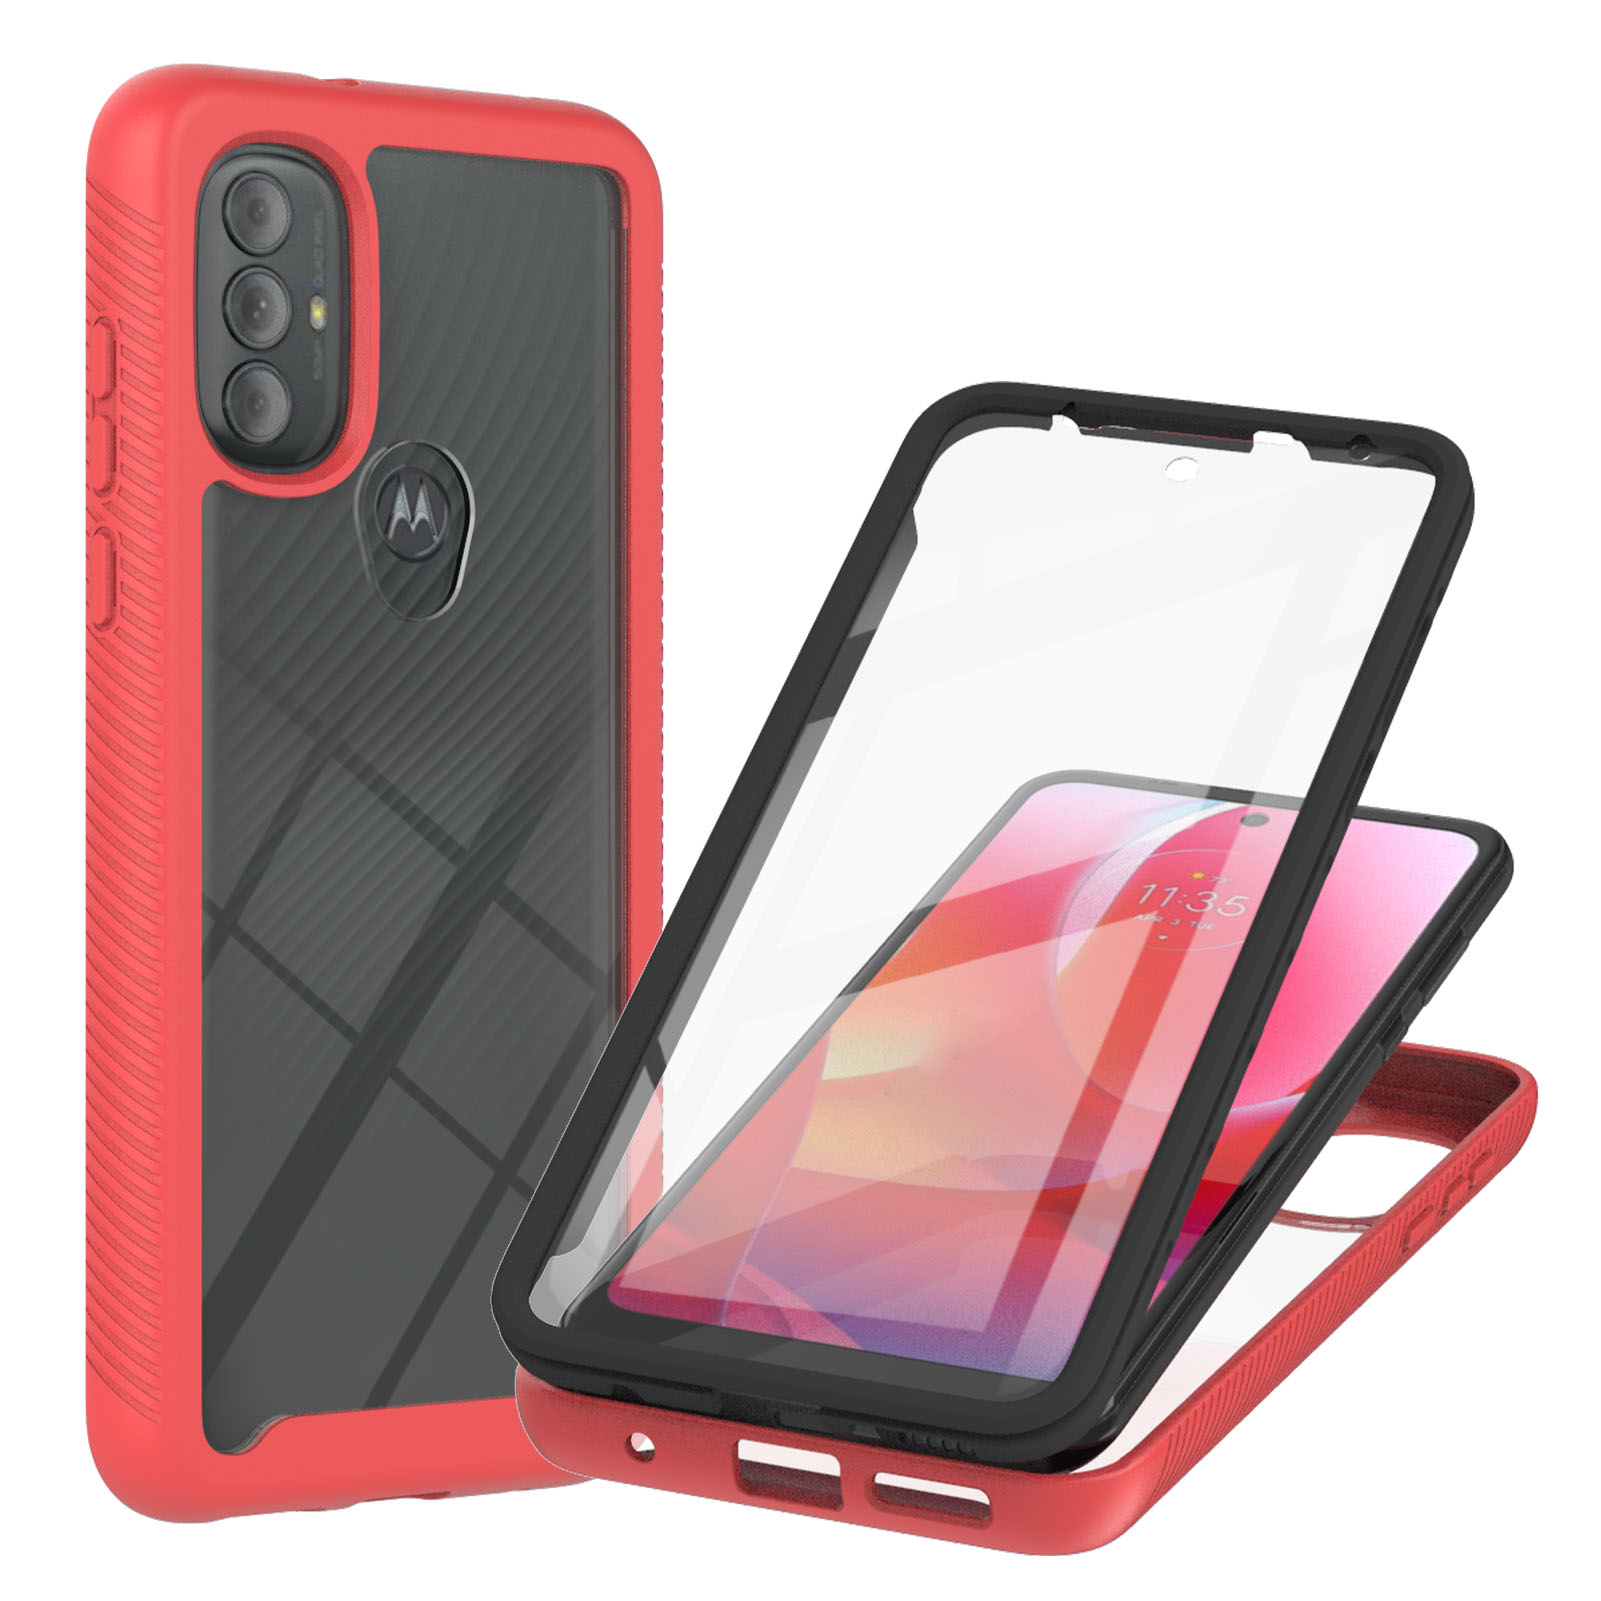 Feishell for Motorola Moto G Power (2022) Case with PET Front Film,Drop Protection Hybrid 3-in-1 Rugged Clear Anti-yellowing Slim Full Body Protection Phone Case Support Wireless Charging,Red - image 1 of 6